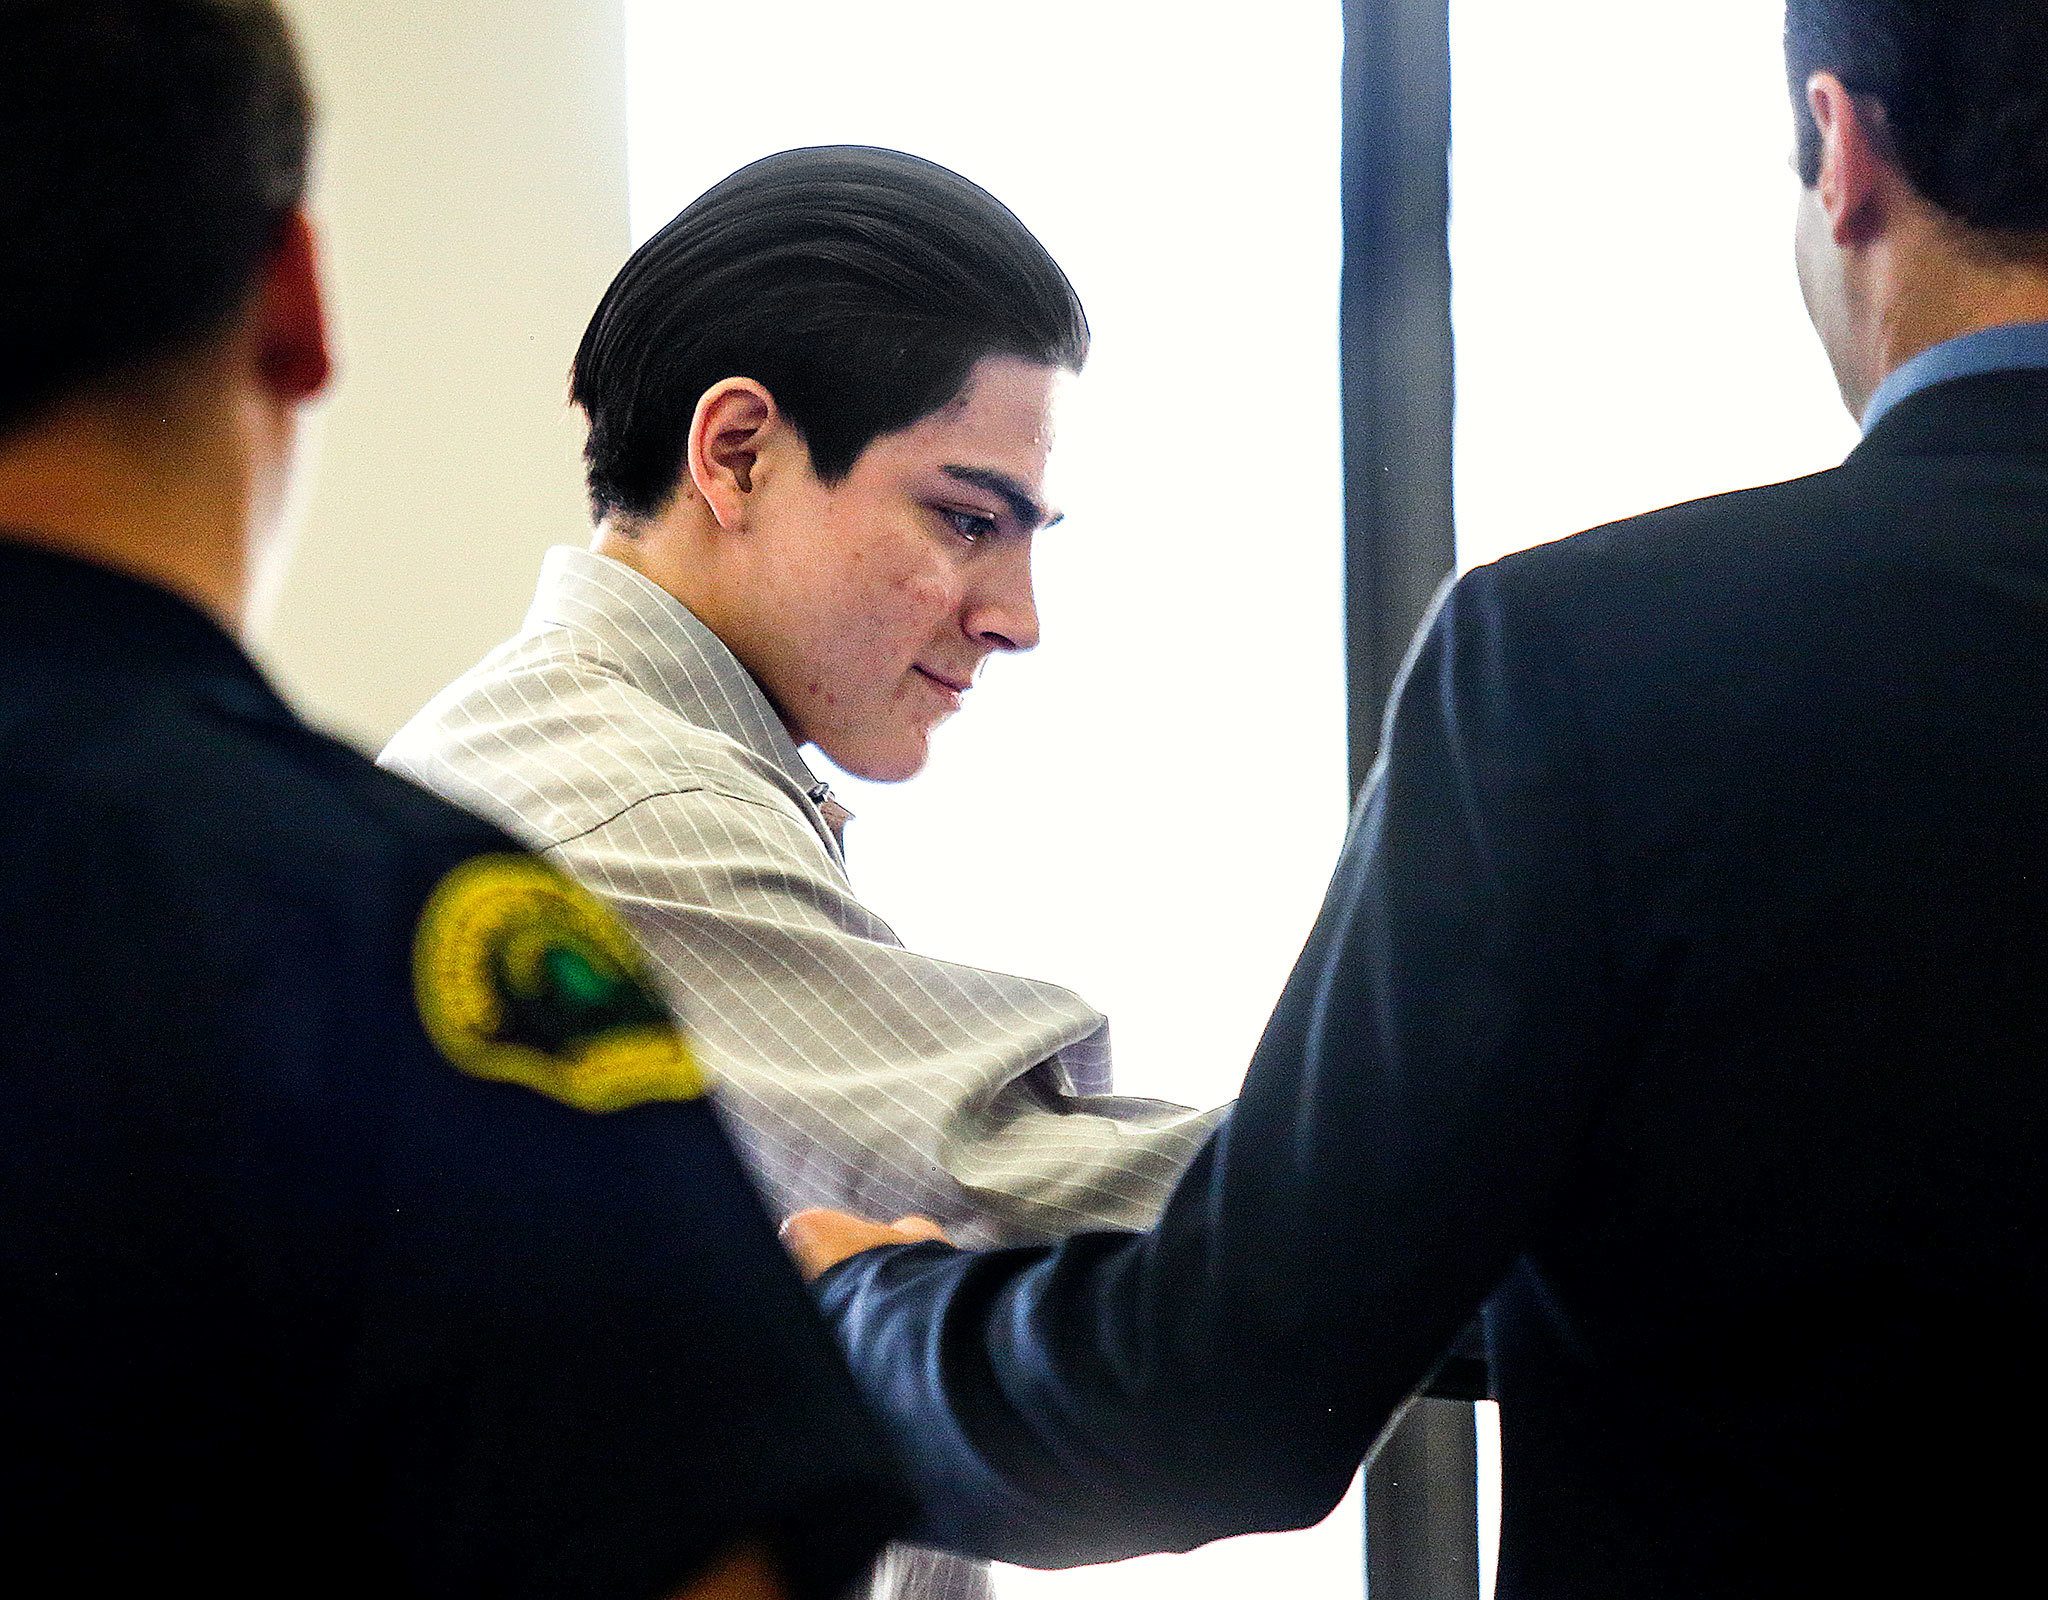 Chris Gonzalez-Garcia is handed over to his defense attorney, Paul Thompson, at the start of his trial Thursday. He is accused of strangling to death Chris Davis, whom he contacted through an ad on Craigslist last year. (Dan Bates / The Herald)